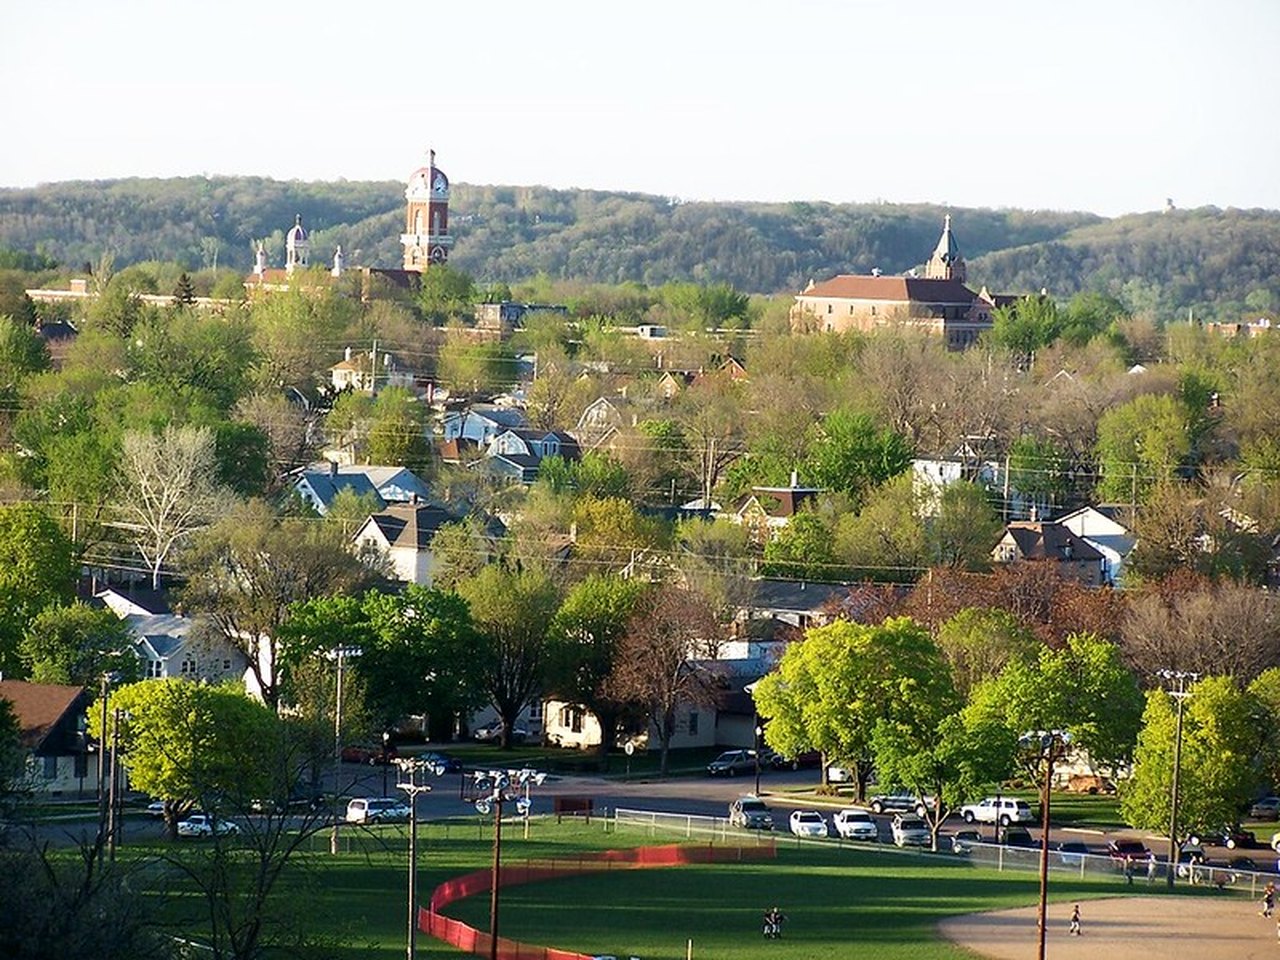 New Ulm, Minnesota Is One Of The Most Unique Towns In America